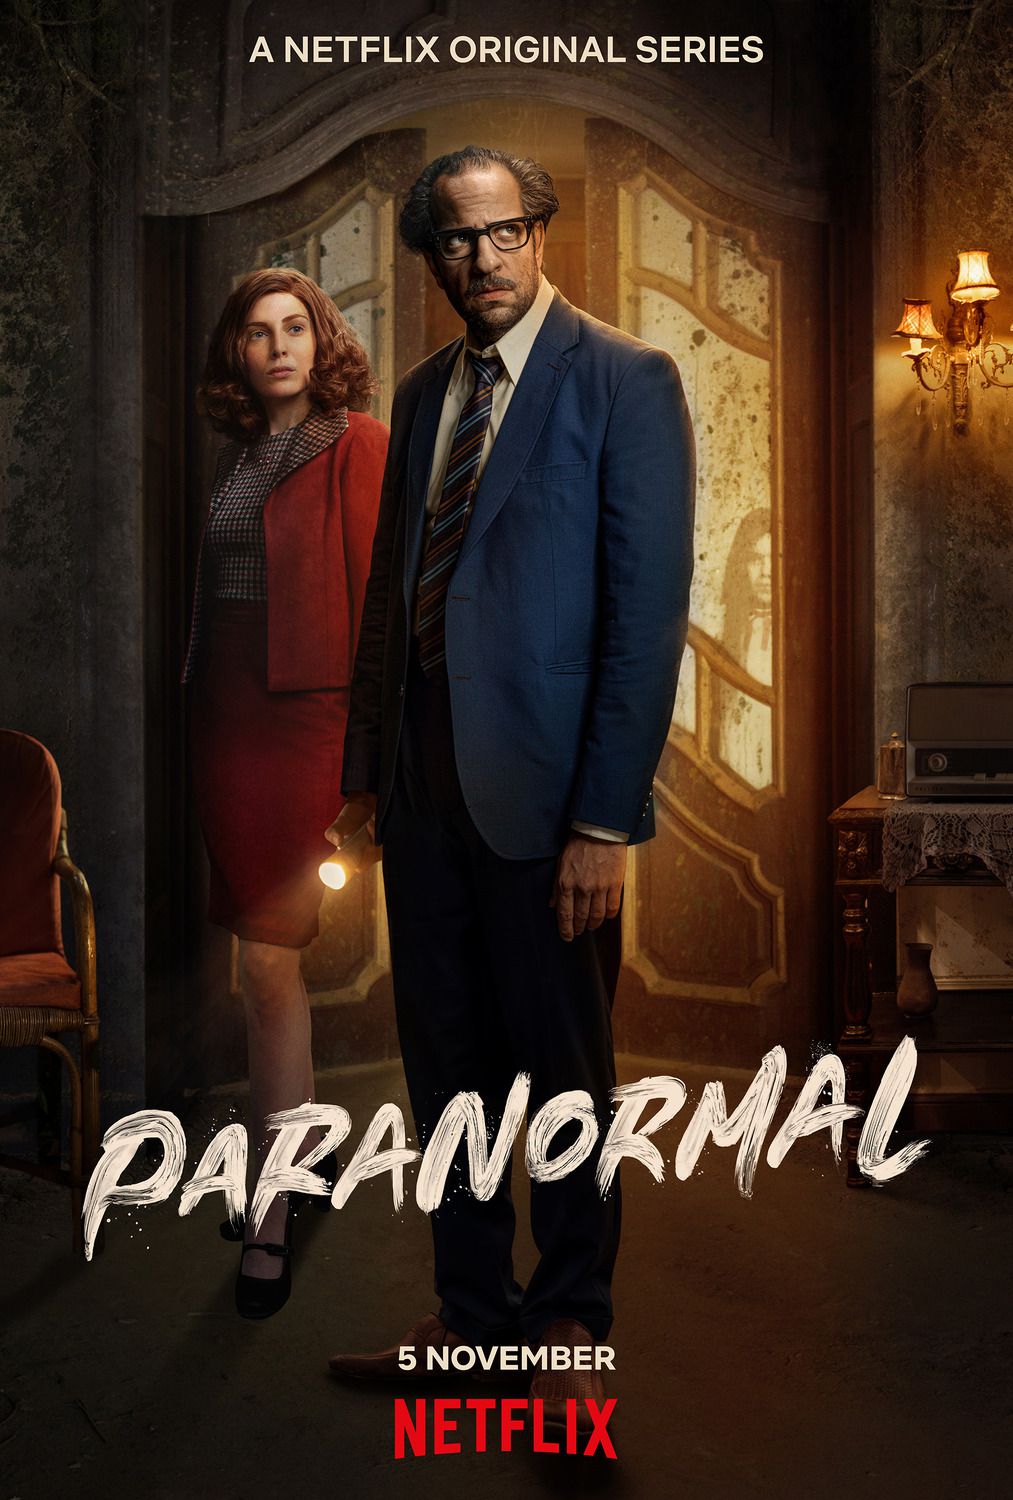 Paranormal - Série (2020) streaming VF gratuit complet